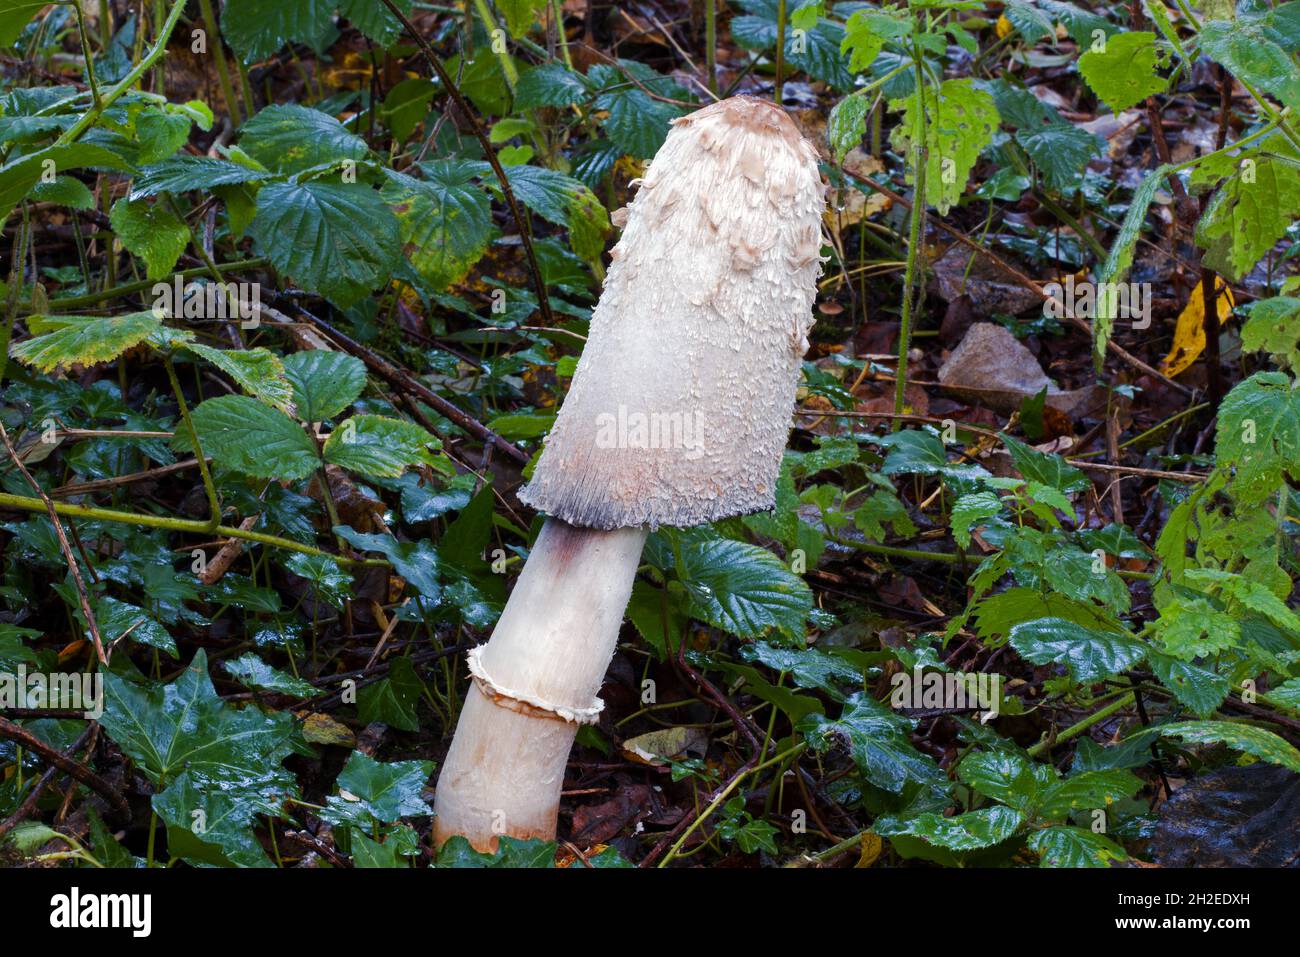 Shown here is a giant example of the fungus Coprinus comatus (shaggy ink cap). The picture was taken in a woodland in North Wales. Stock Photo